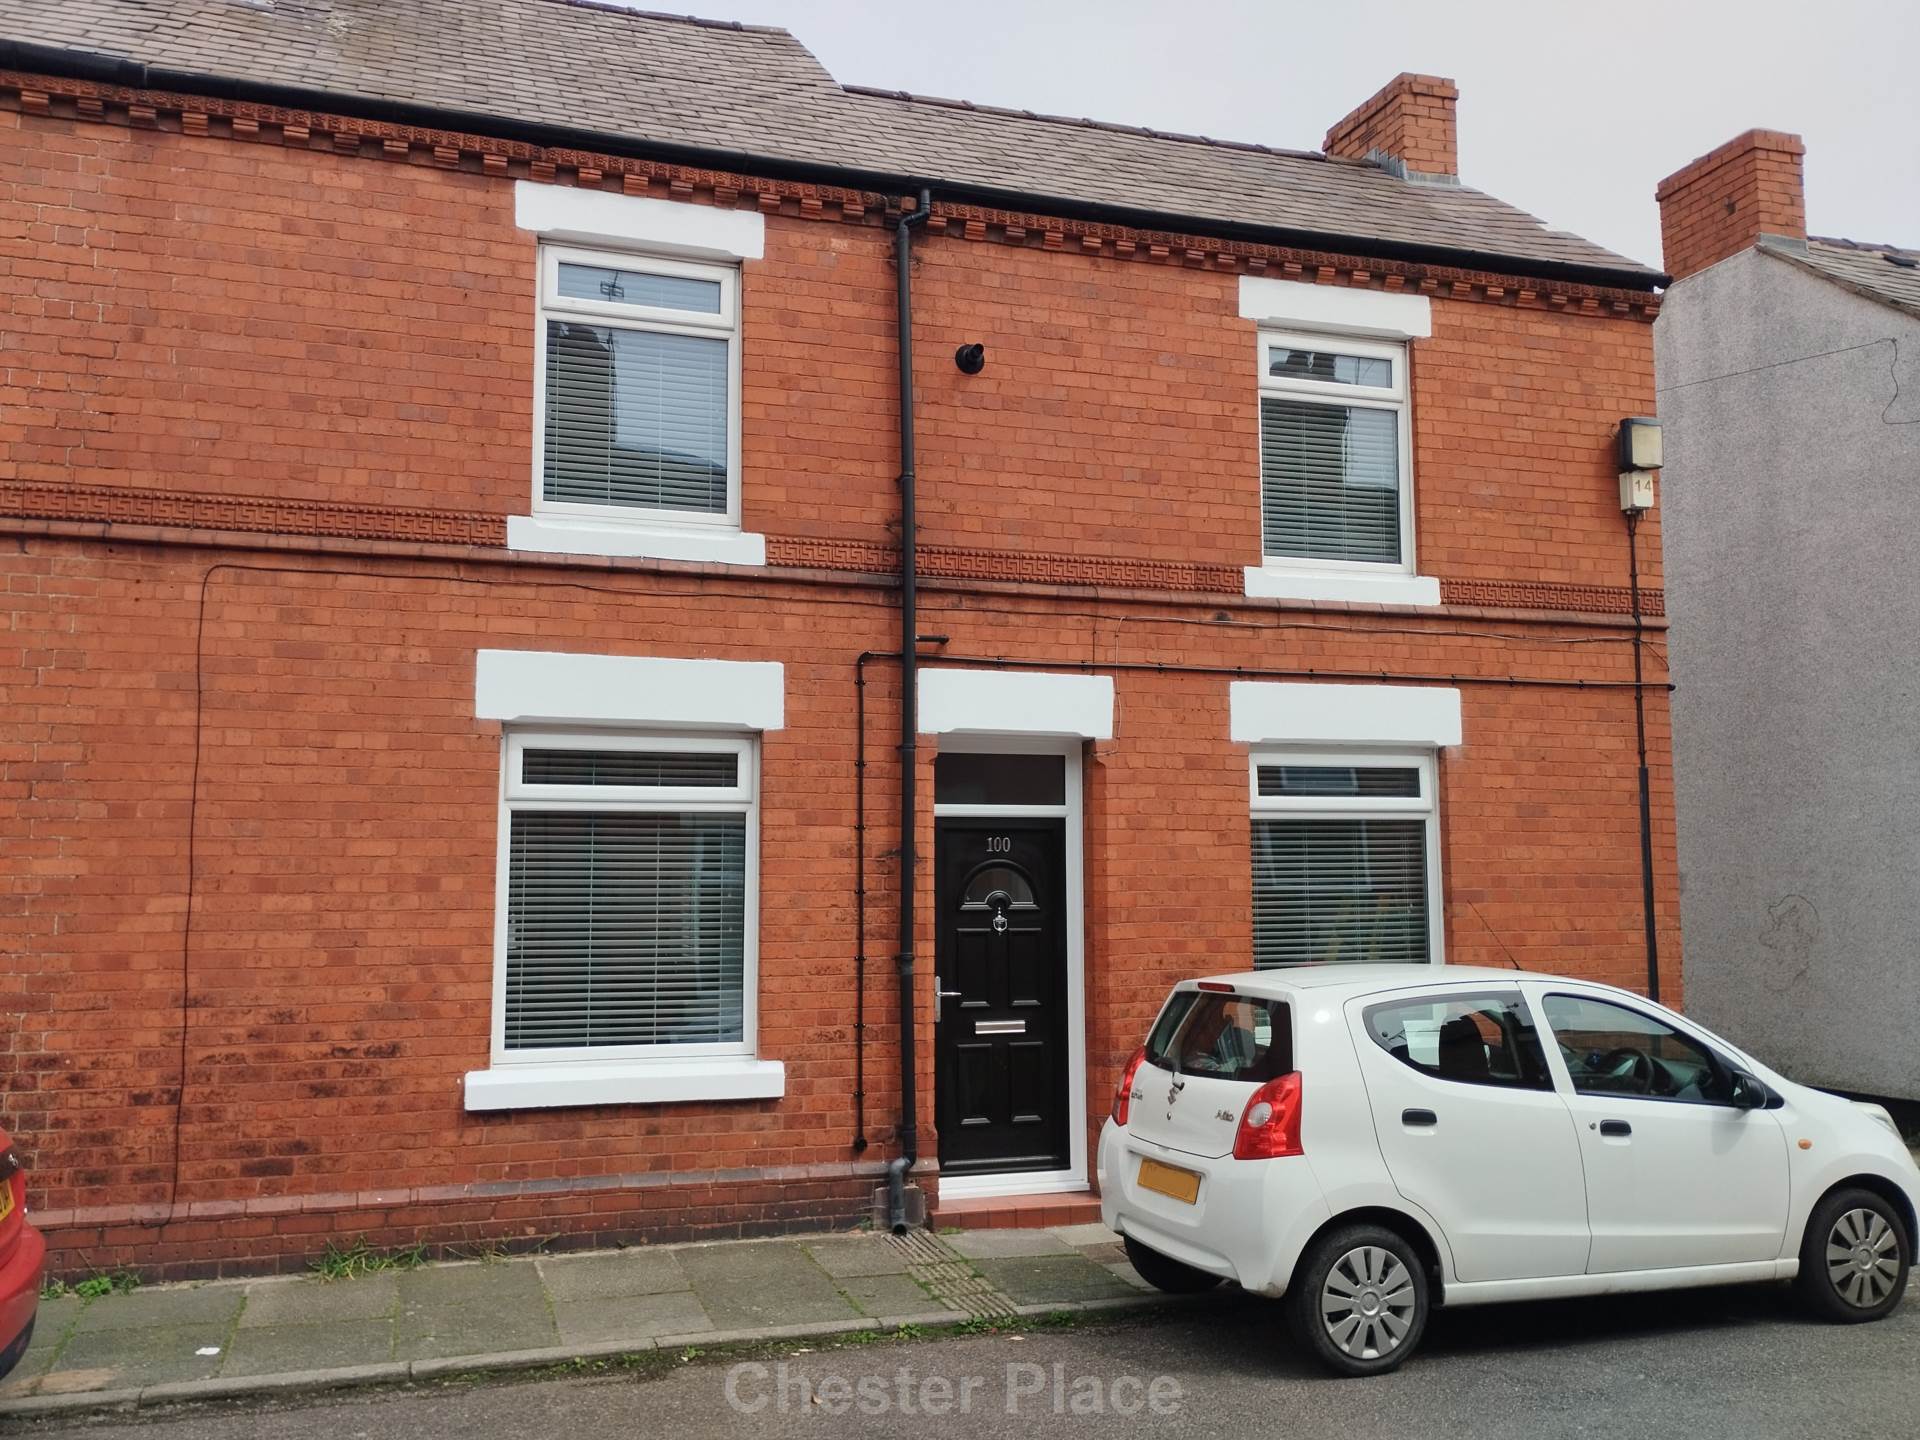 3 bed Mid Terraced House for rent in Chester. From Chester Place